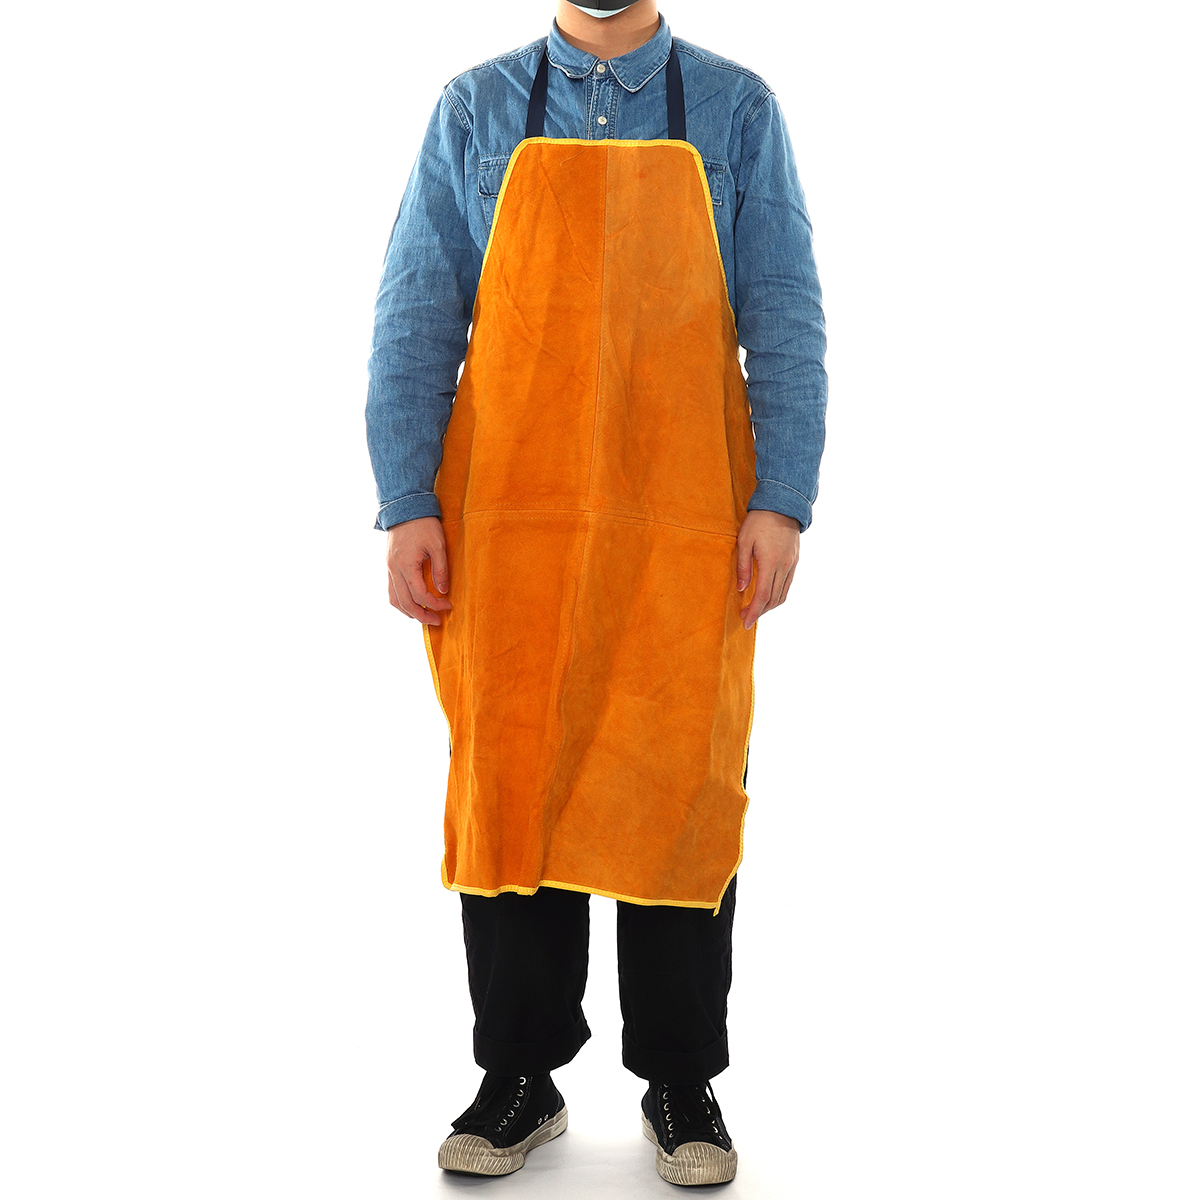 Cowhide-Leather-Welding-Apron-Welder-Protection-Clothe-Mechanic-Protector-Gear-1642713-6